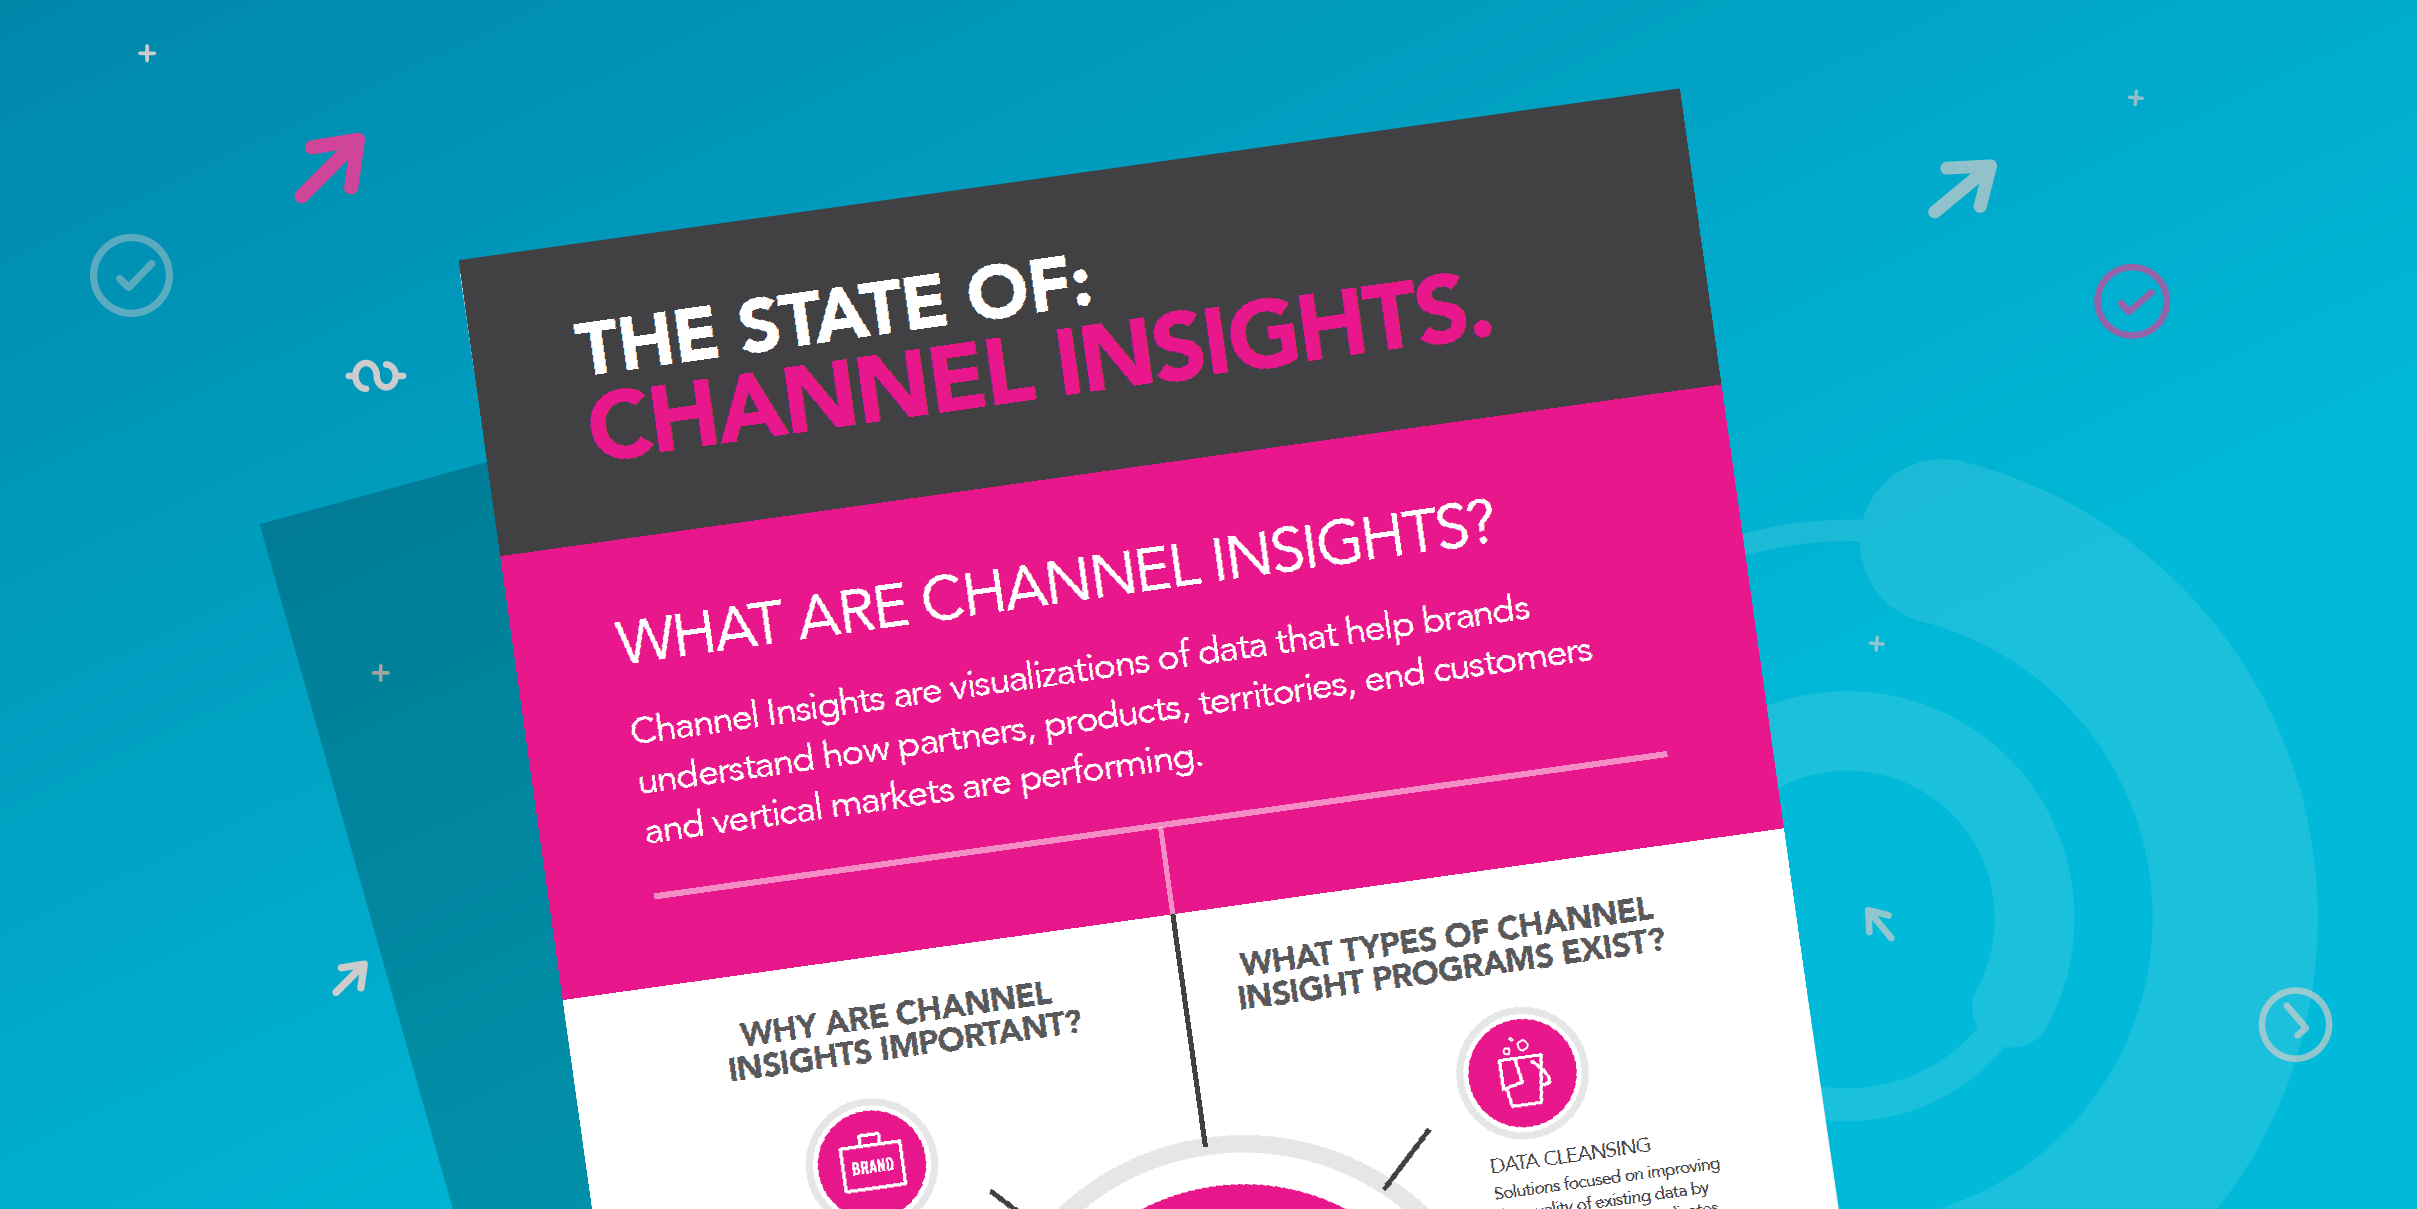 Infographic about the state of channel insights